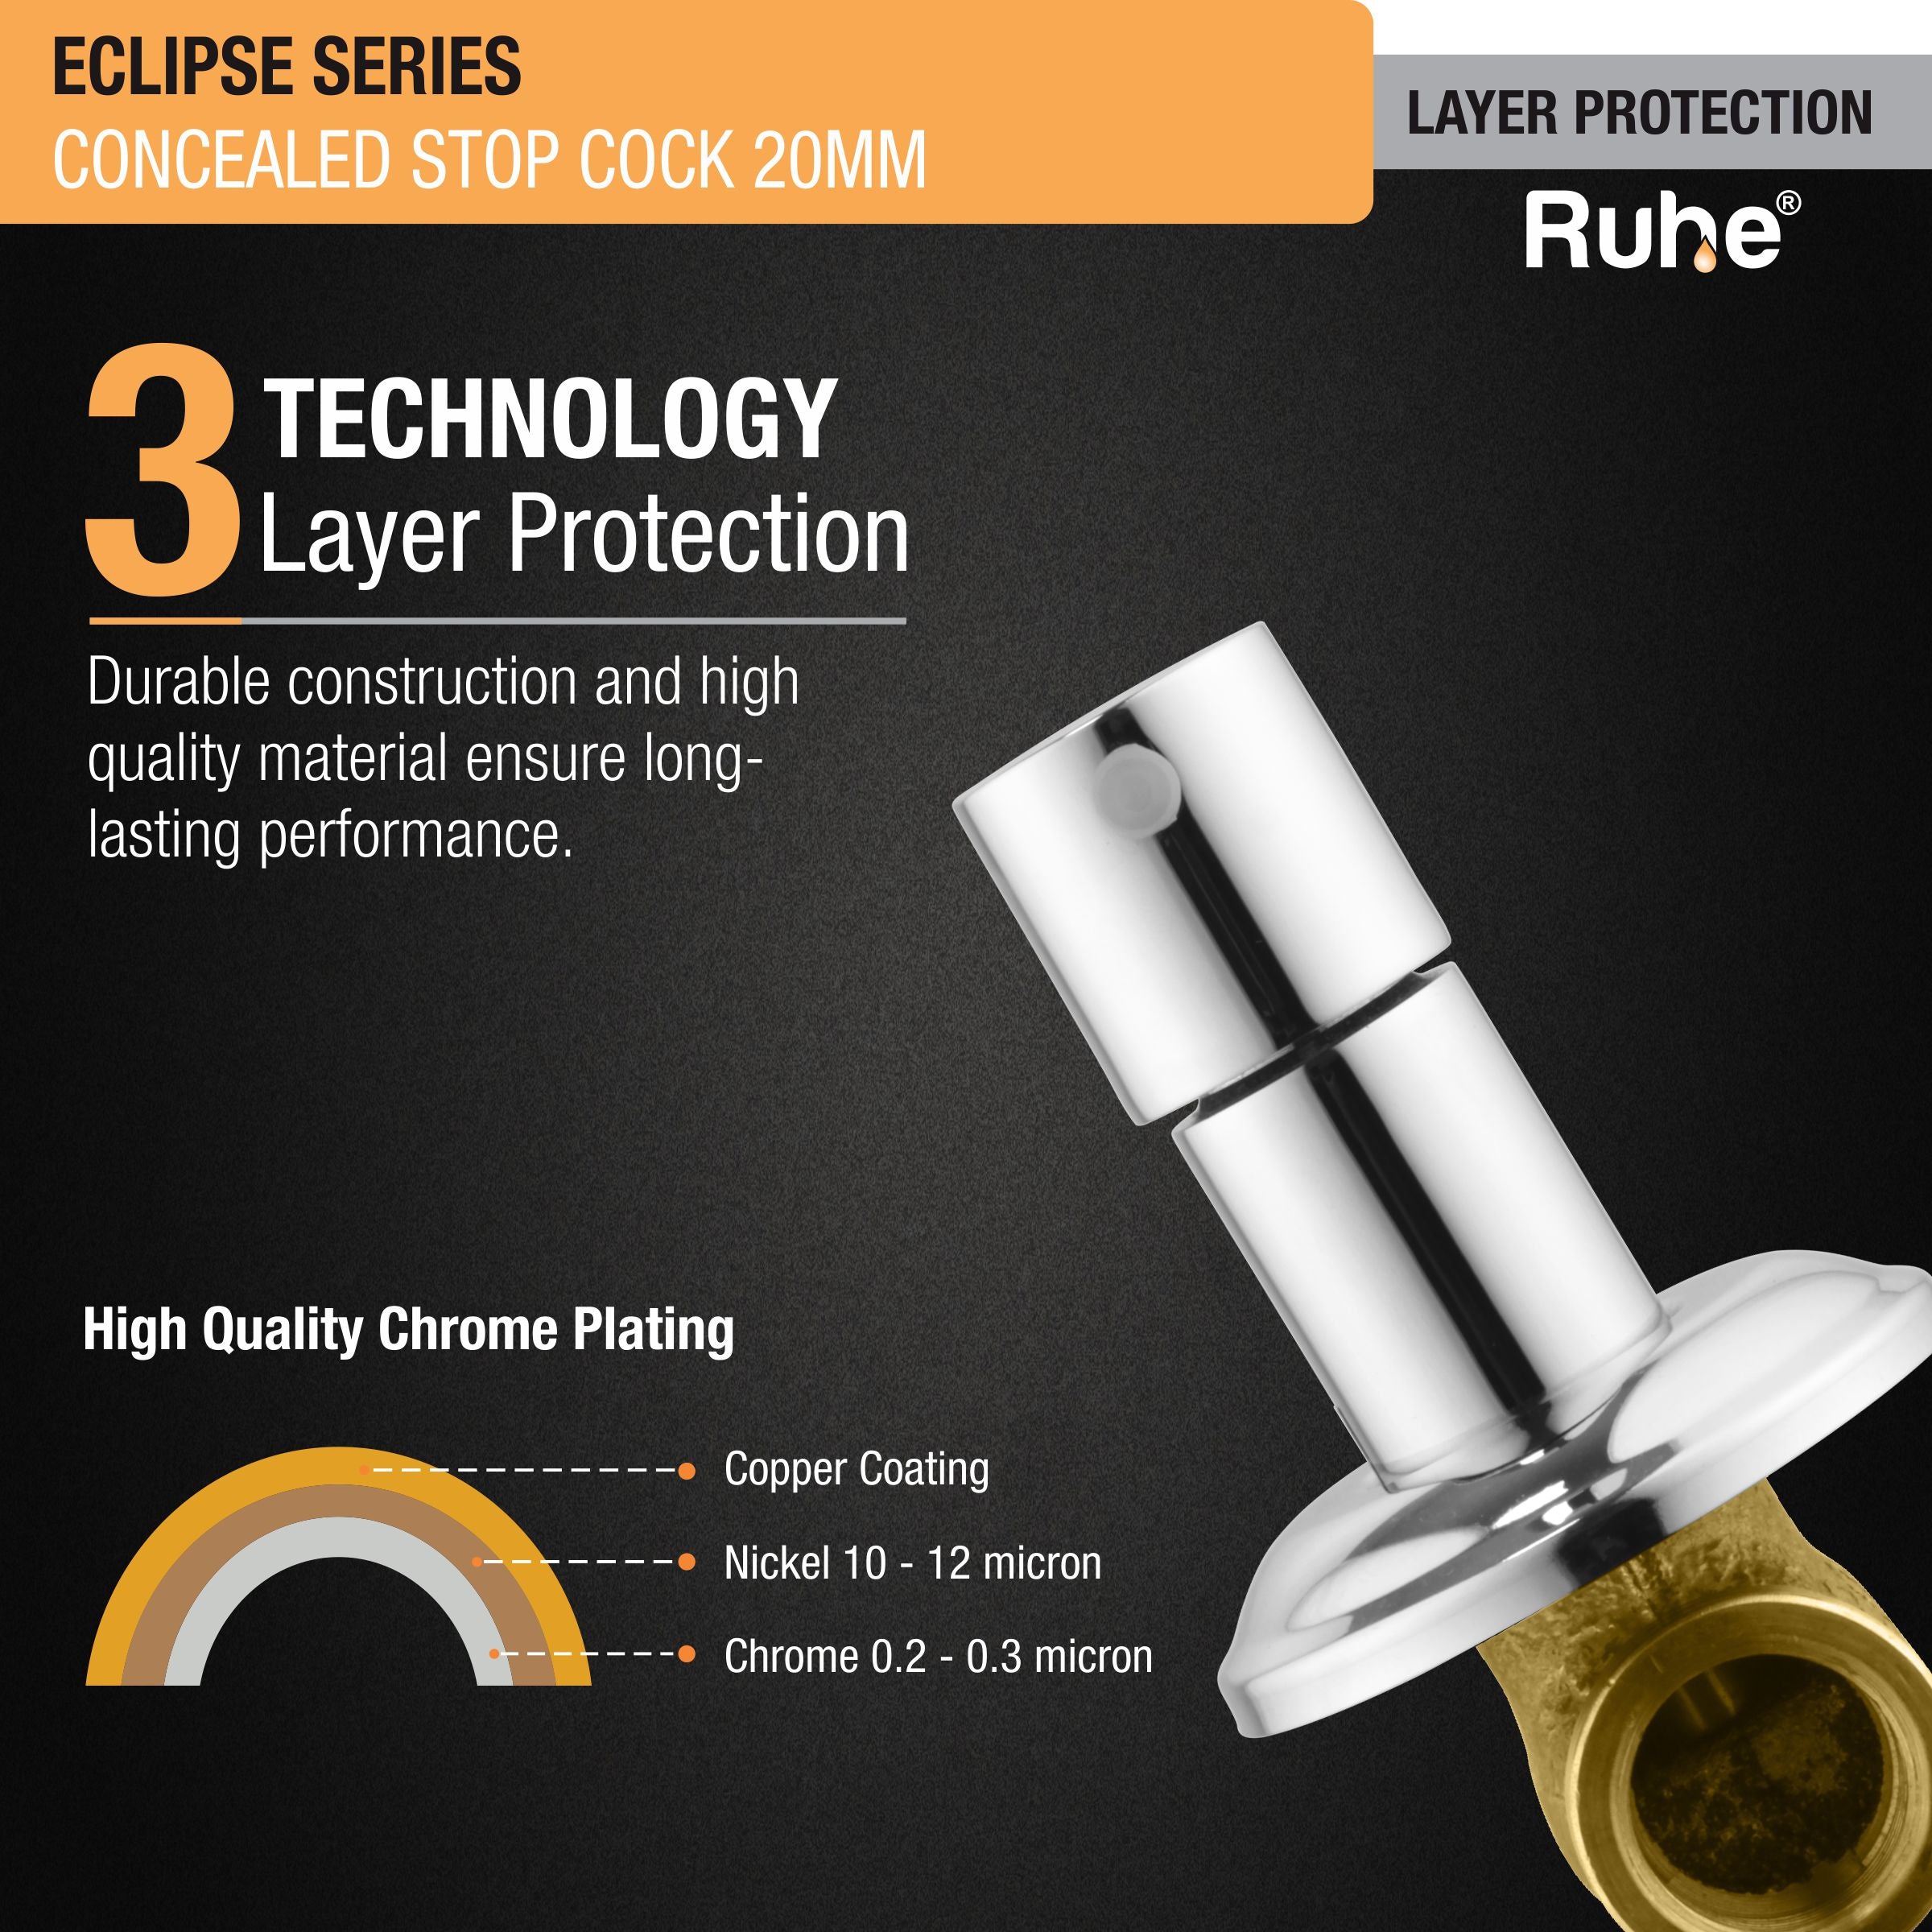 Eclipse Concealed Stop Valve Brass Faucet (20mm) 3 layer protection